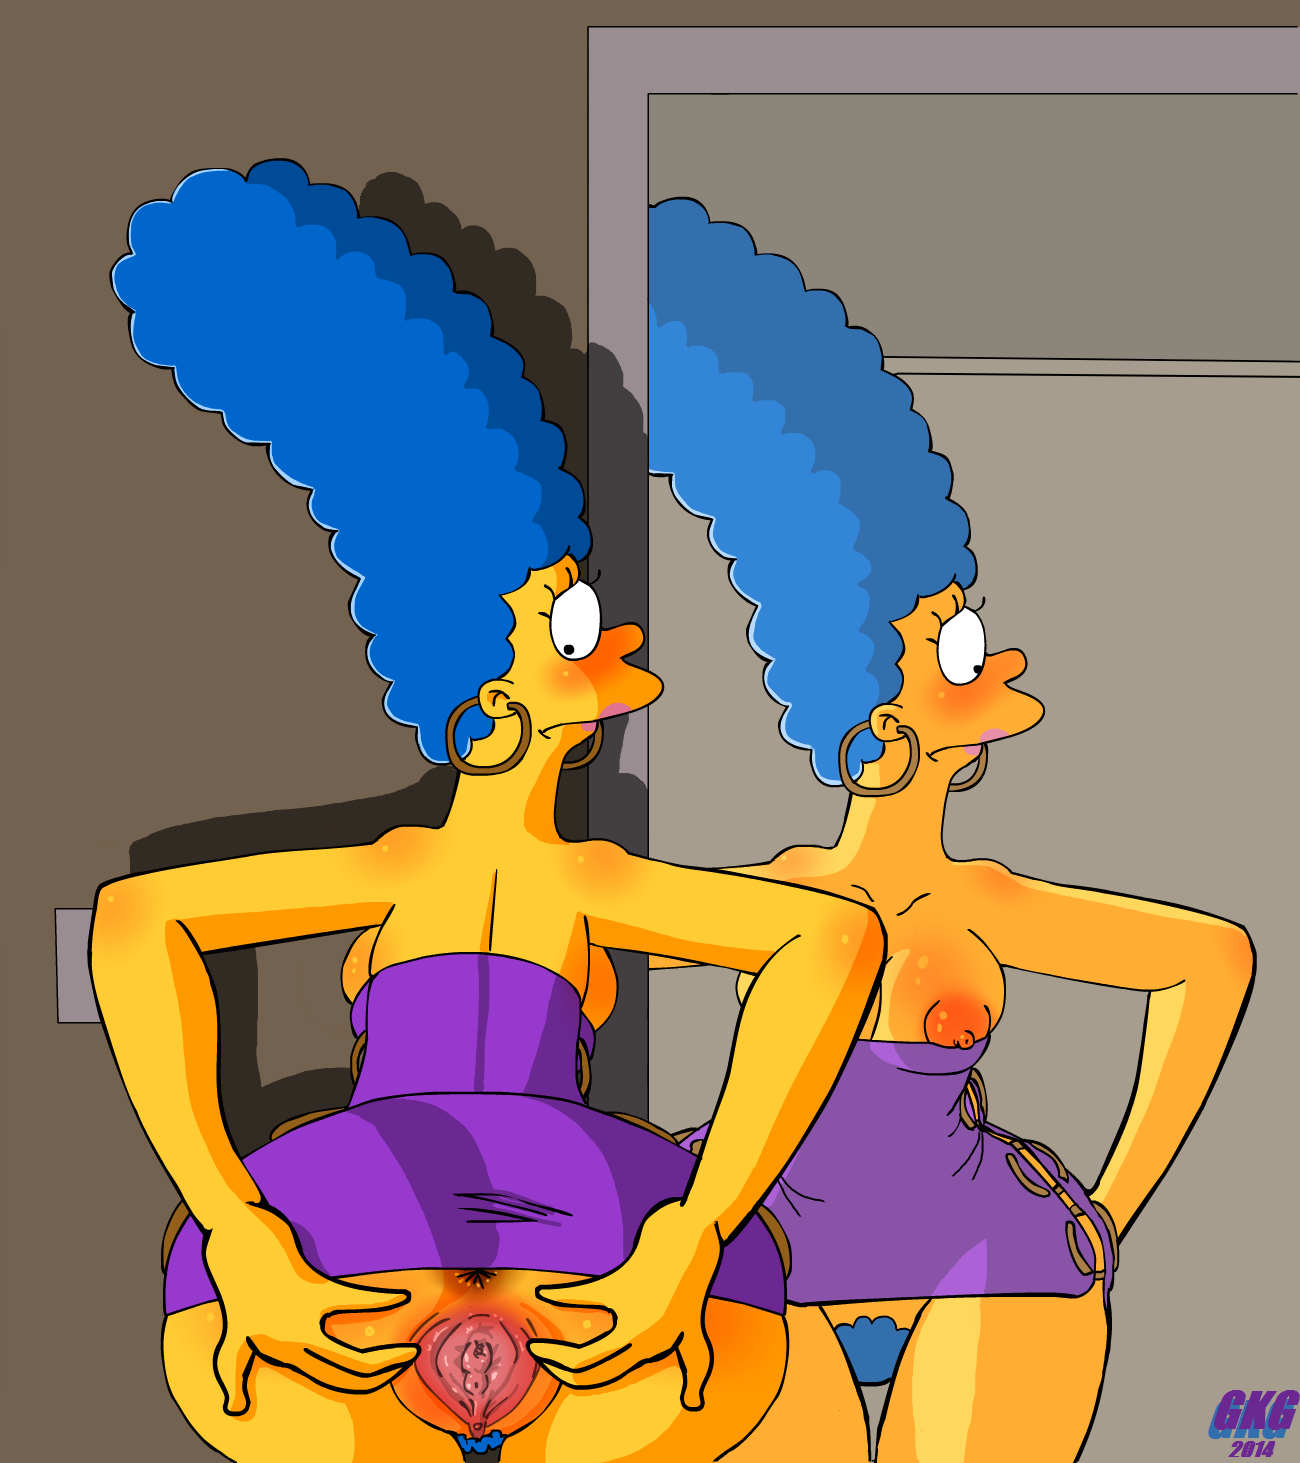 Rule34 - If it exists, there is porn of it / gkg, marge simpson / 5750434.